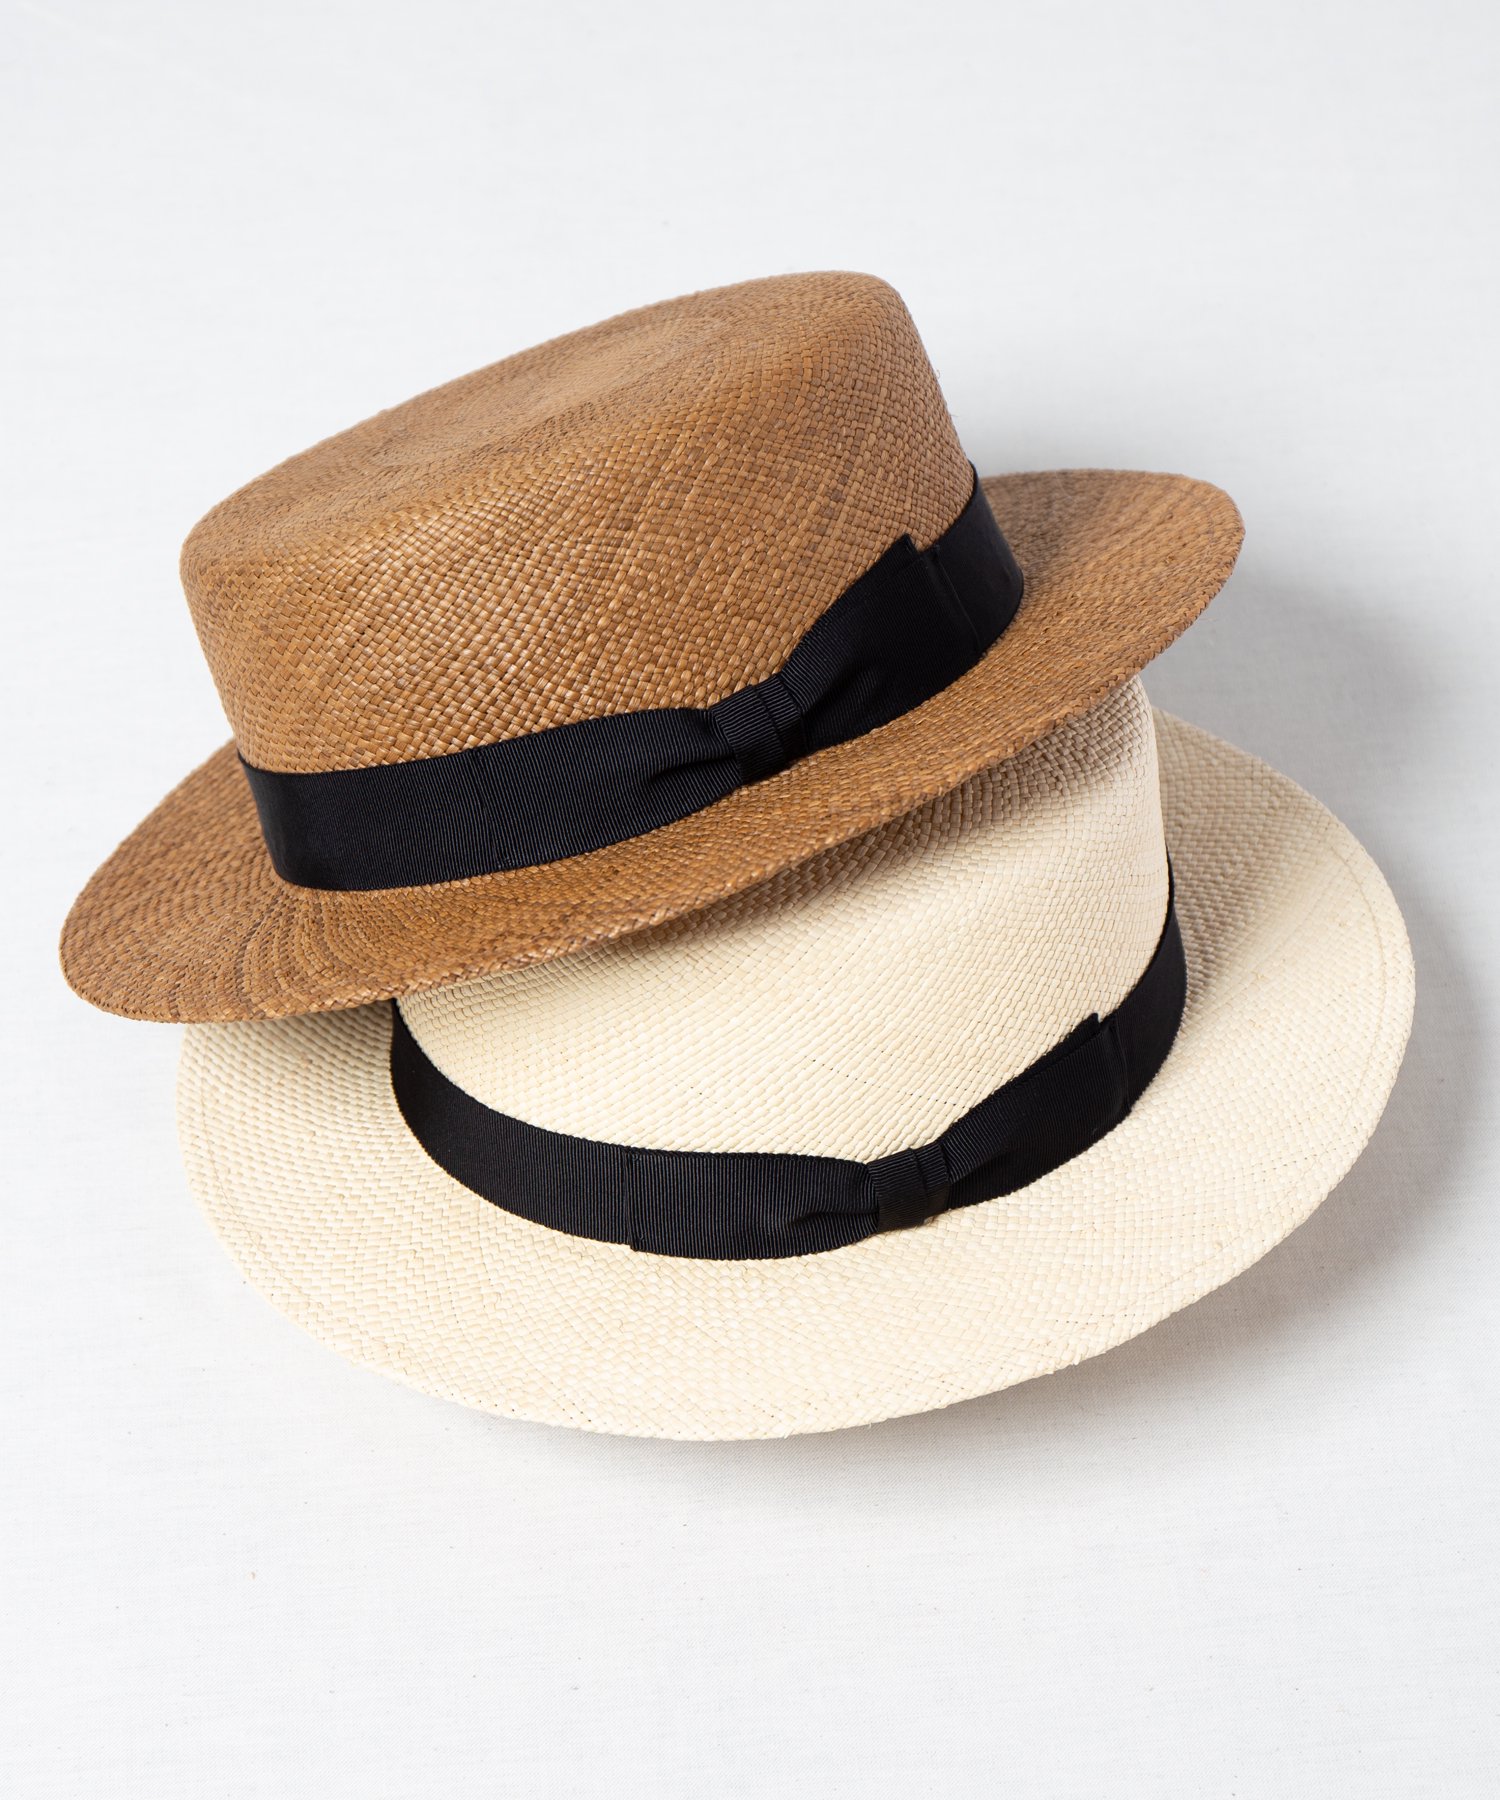 <img class='new_mark_img1' src='https://img.shop-pro.jp/img/new/icons20.gif' style='border:none;display:inline;margin:0px;padding:0px;width:auto;' />RACAL Panama Boater Hat 1168 パナマ ボーター ハット　カンカン帽